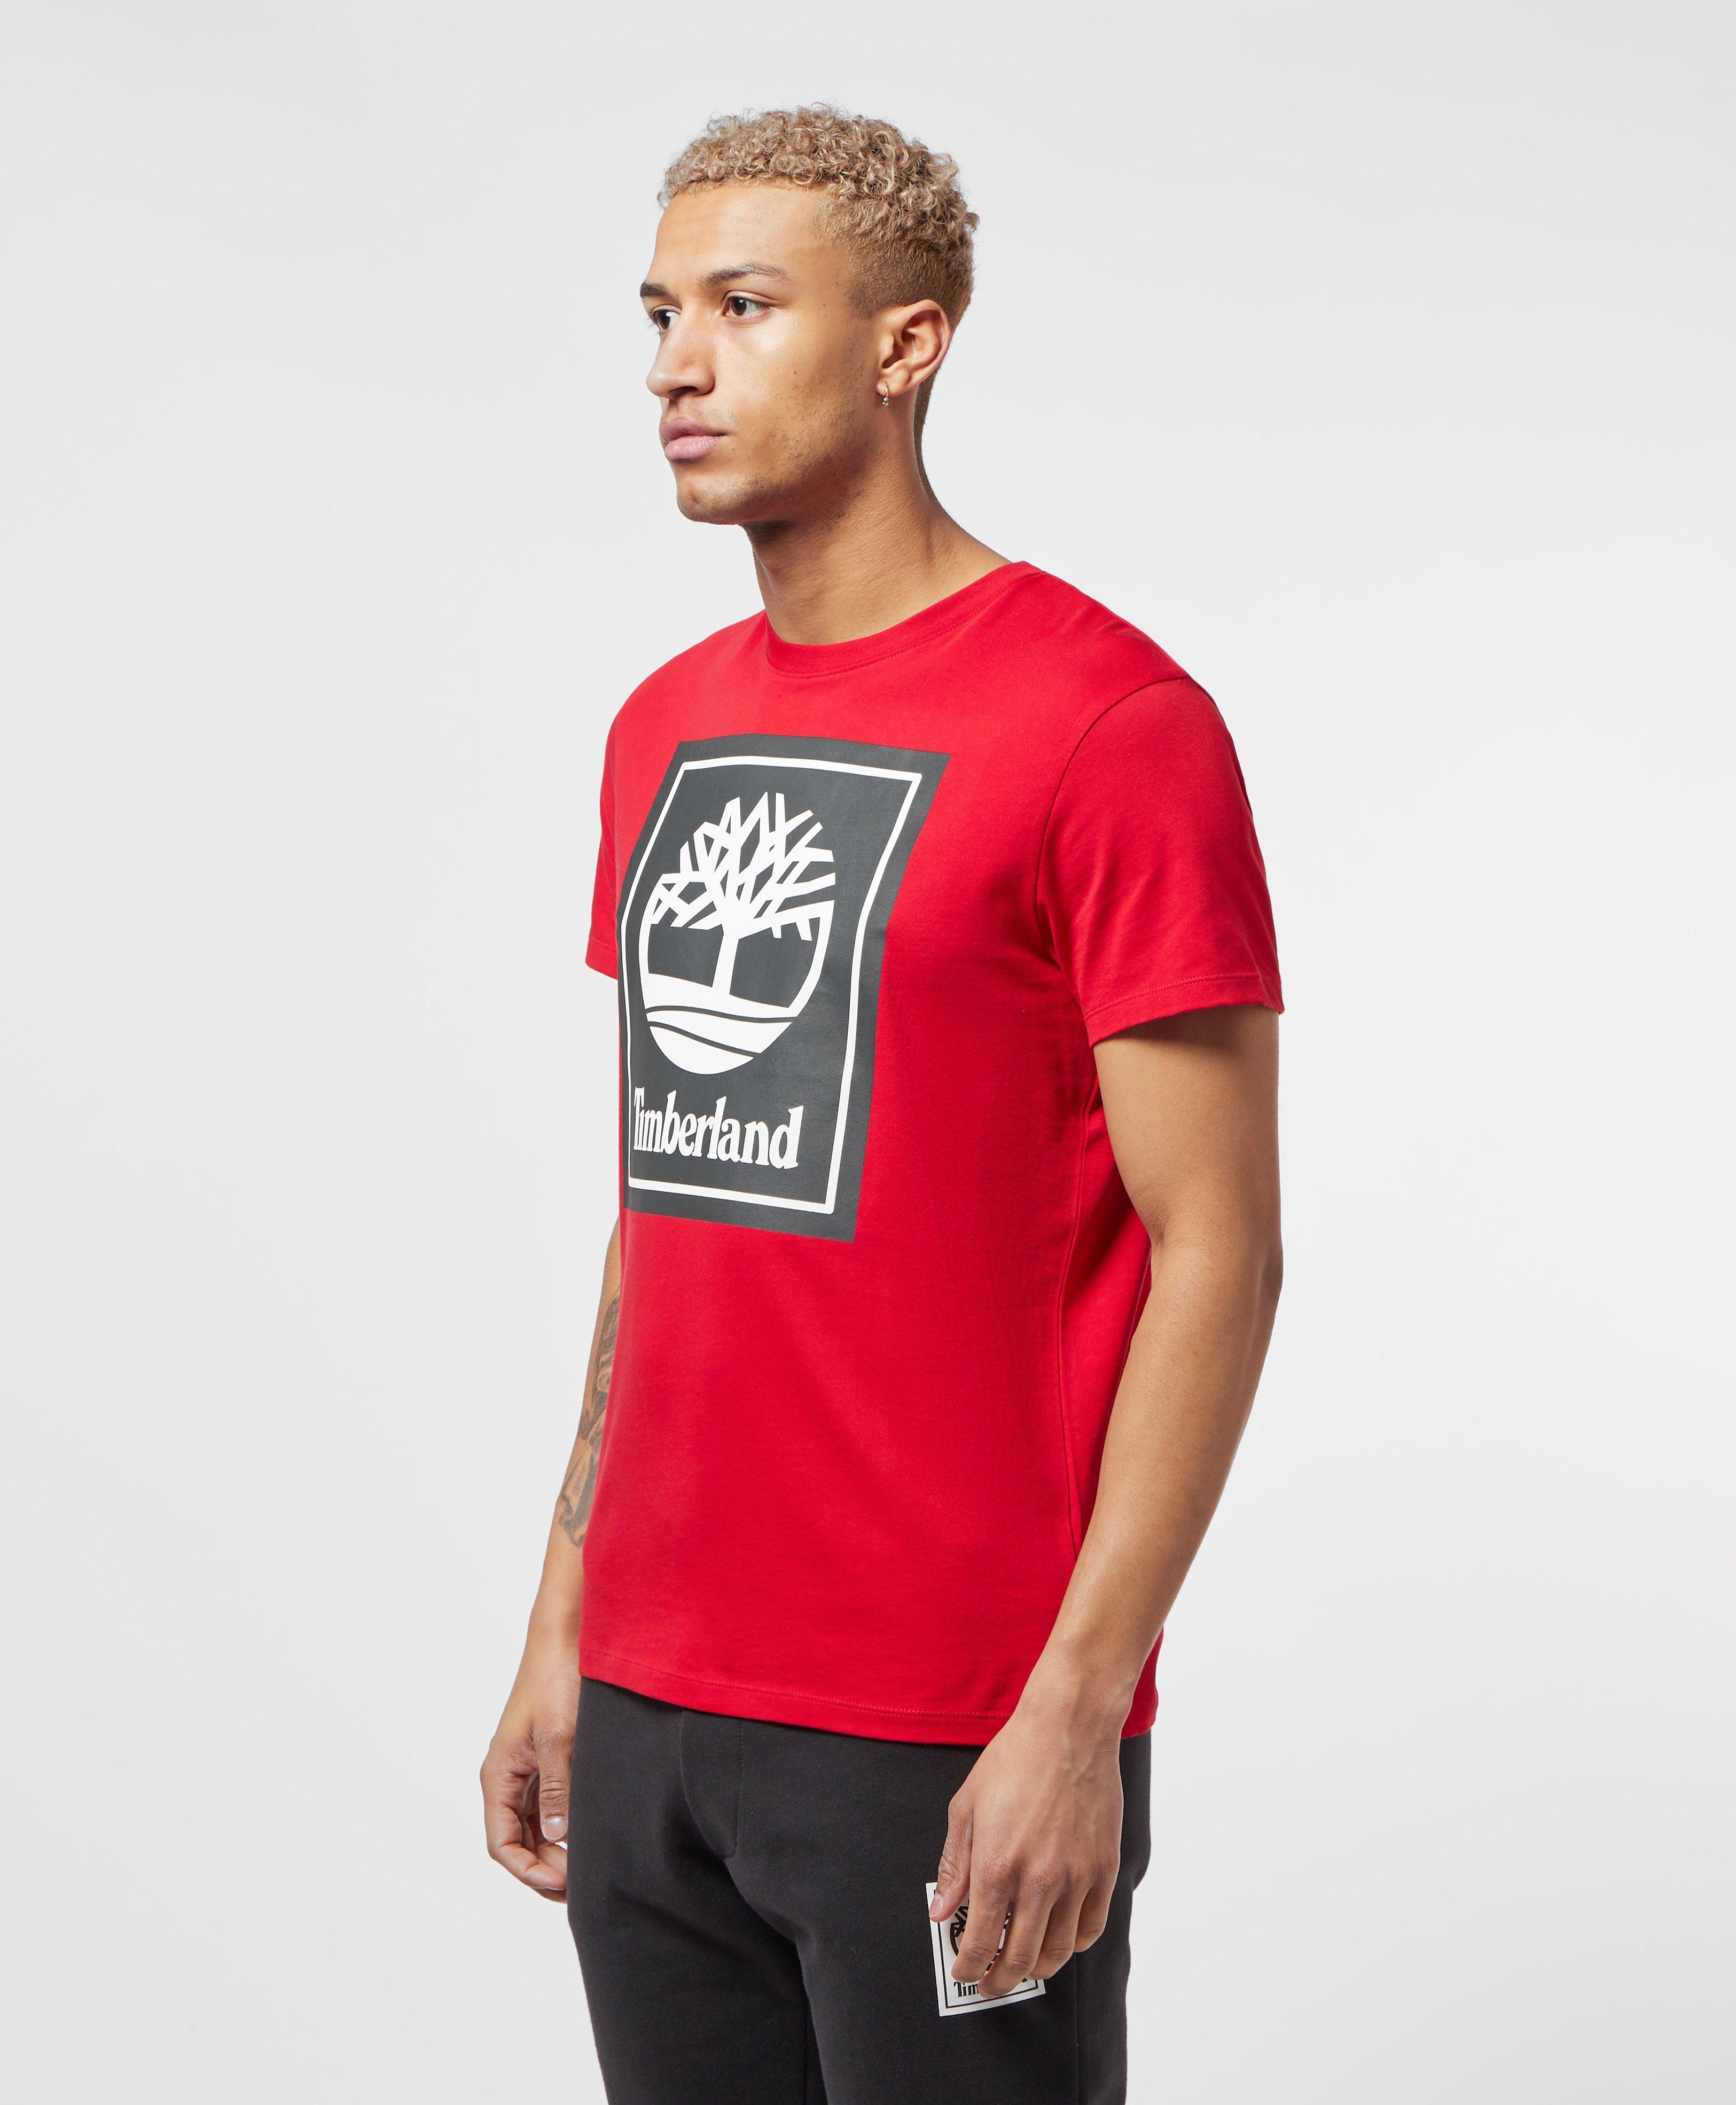 Timberland Big Tree Short Sleeve T-shirt in Red for Men - Lyst